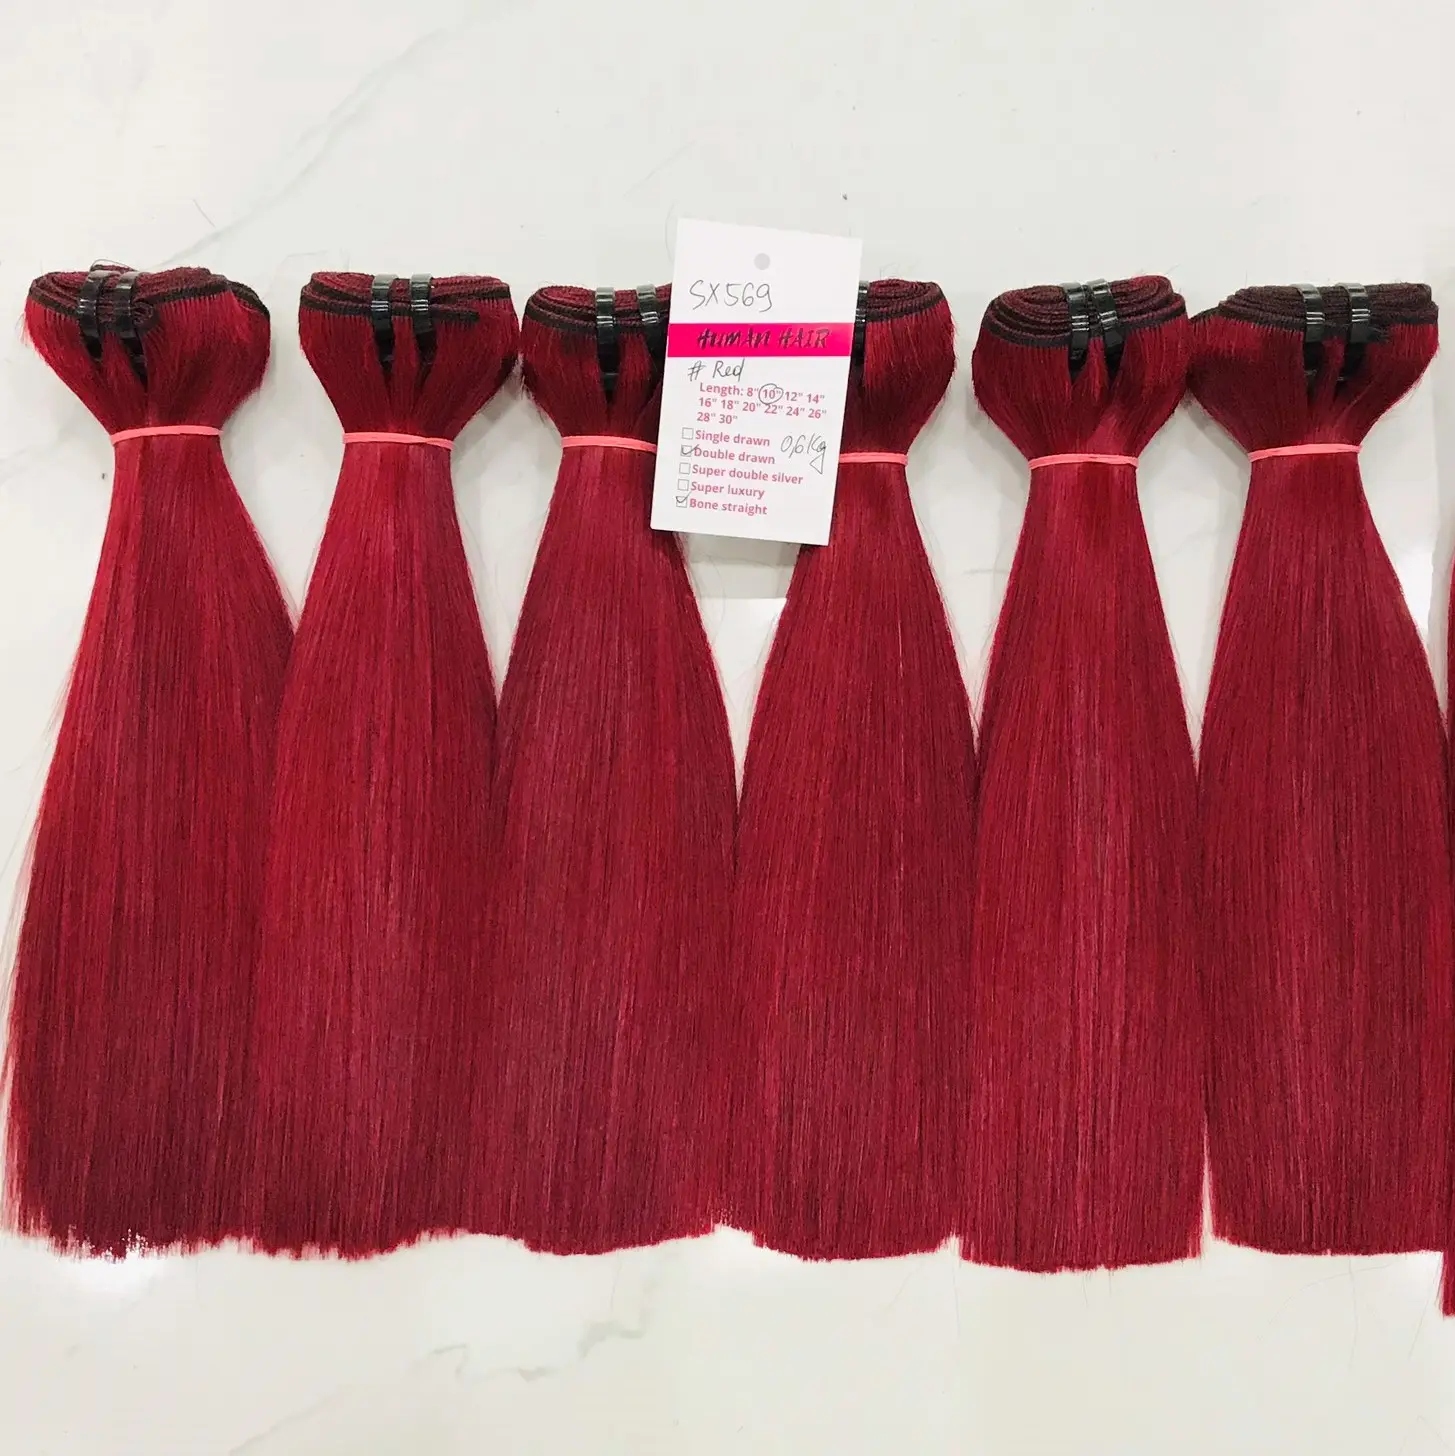 Bone Straight In Red Hair Extensions Made From 100% Remy Cambodian Human Hair Cheap Price